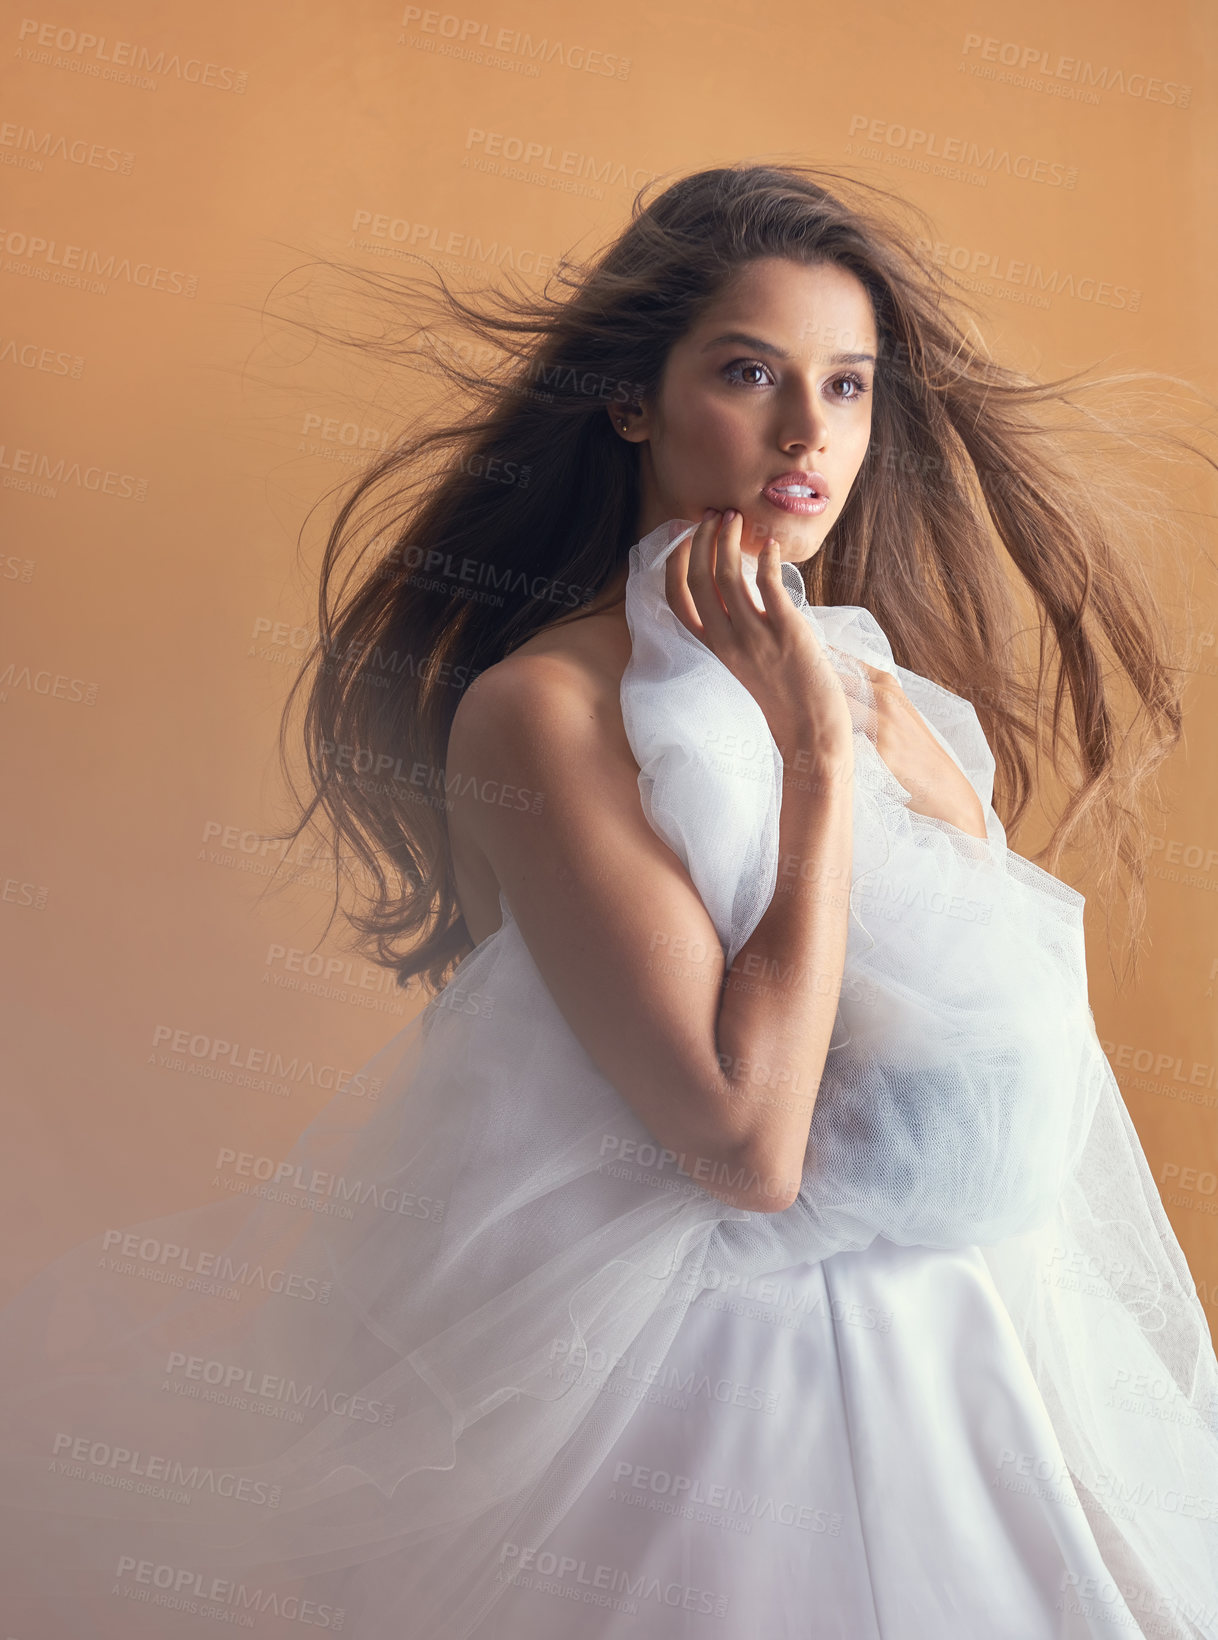 Buy stock photo Shot of a beautiful young woman posing with a ballet skirt in studio